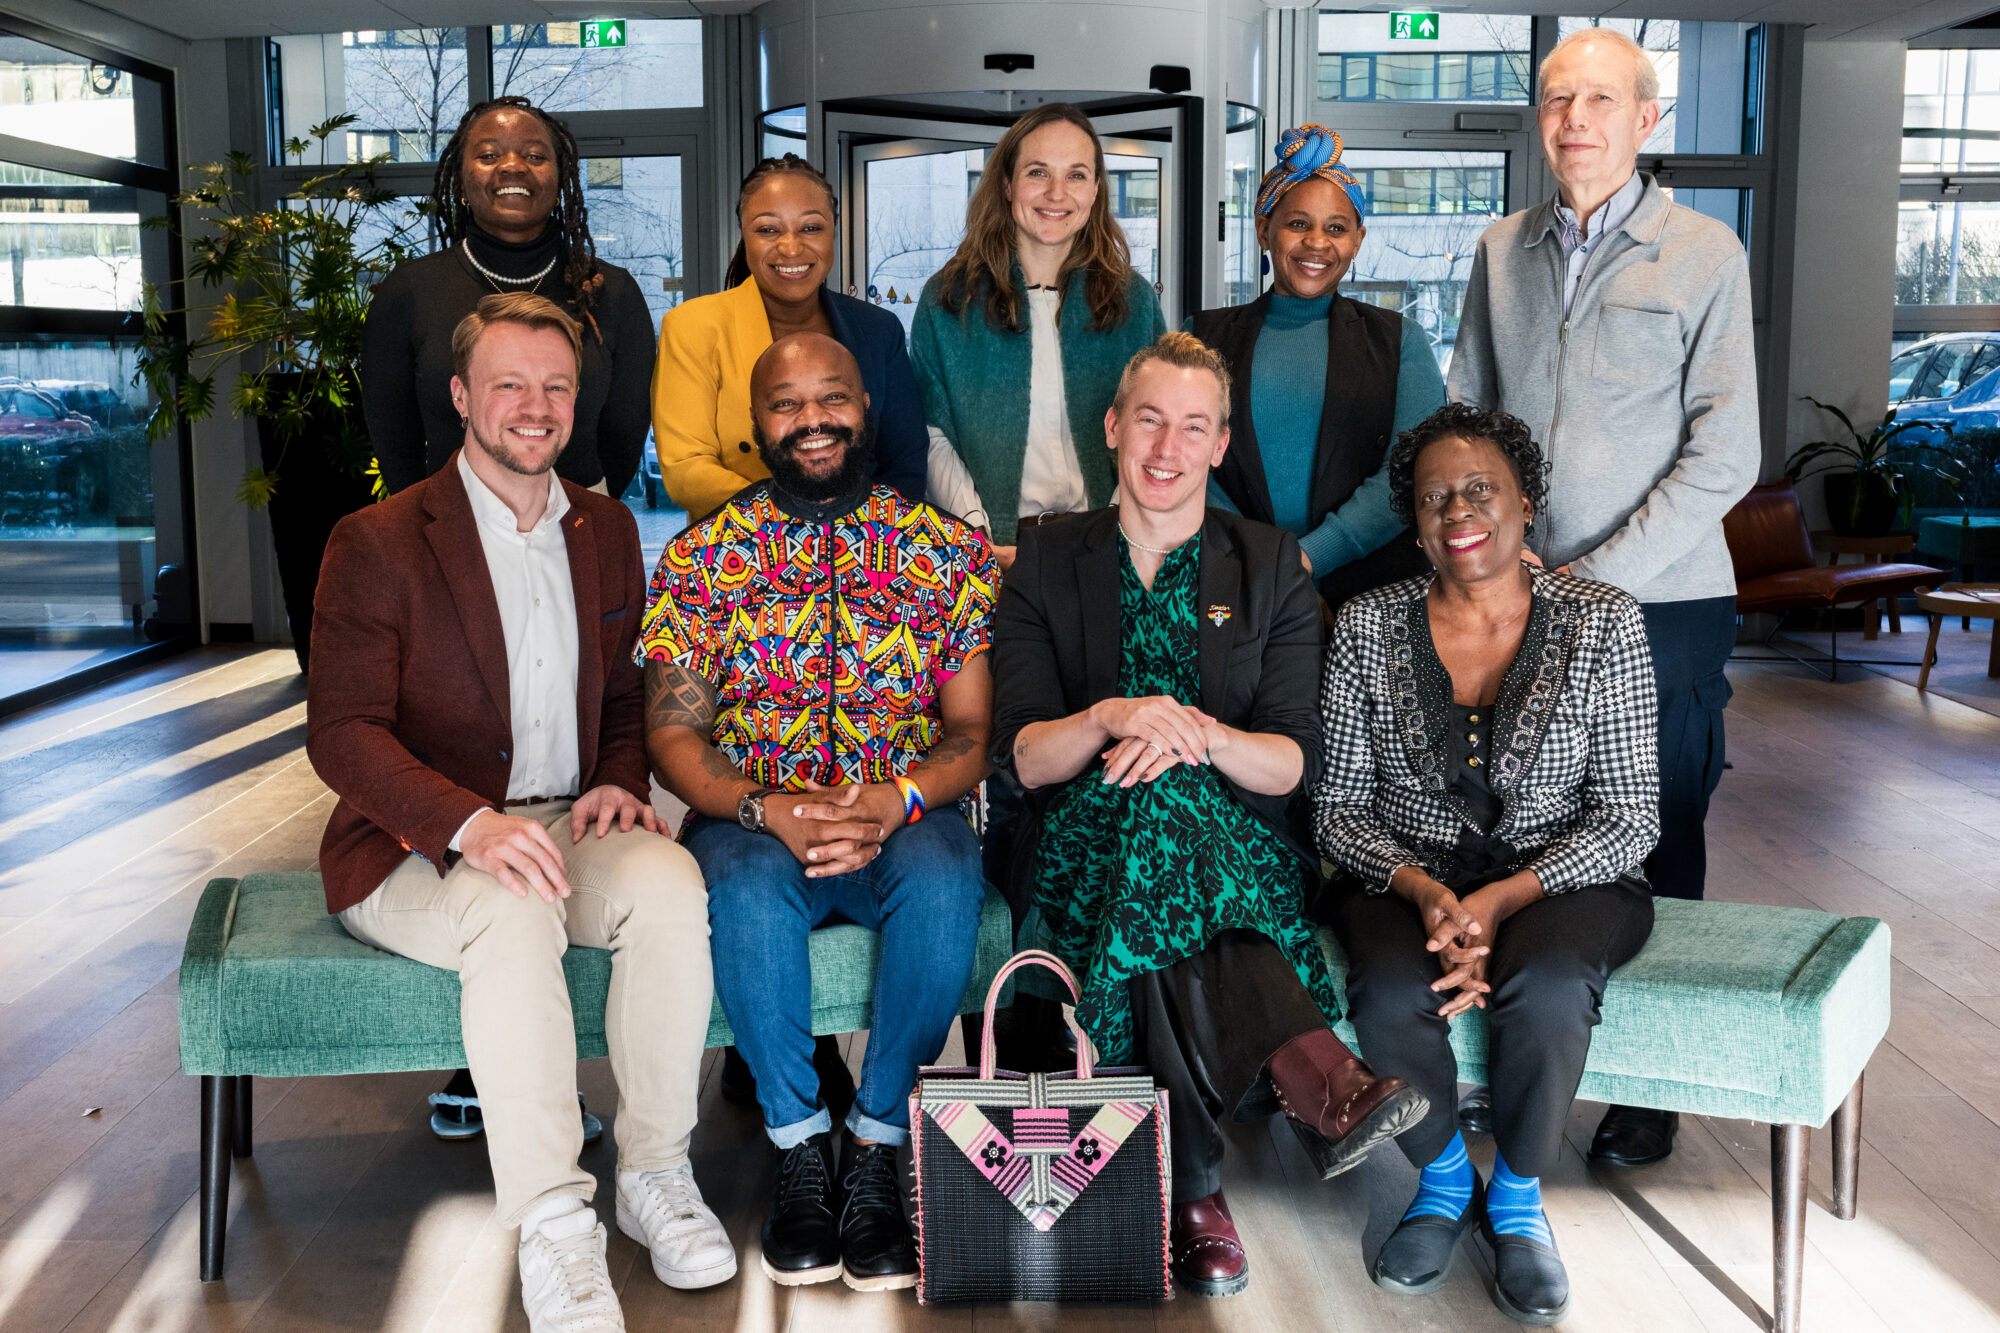 The group of Advisory Panel members of Aidsfonds - Soa Aids Nederland